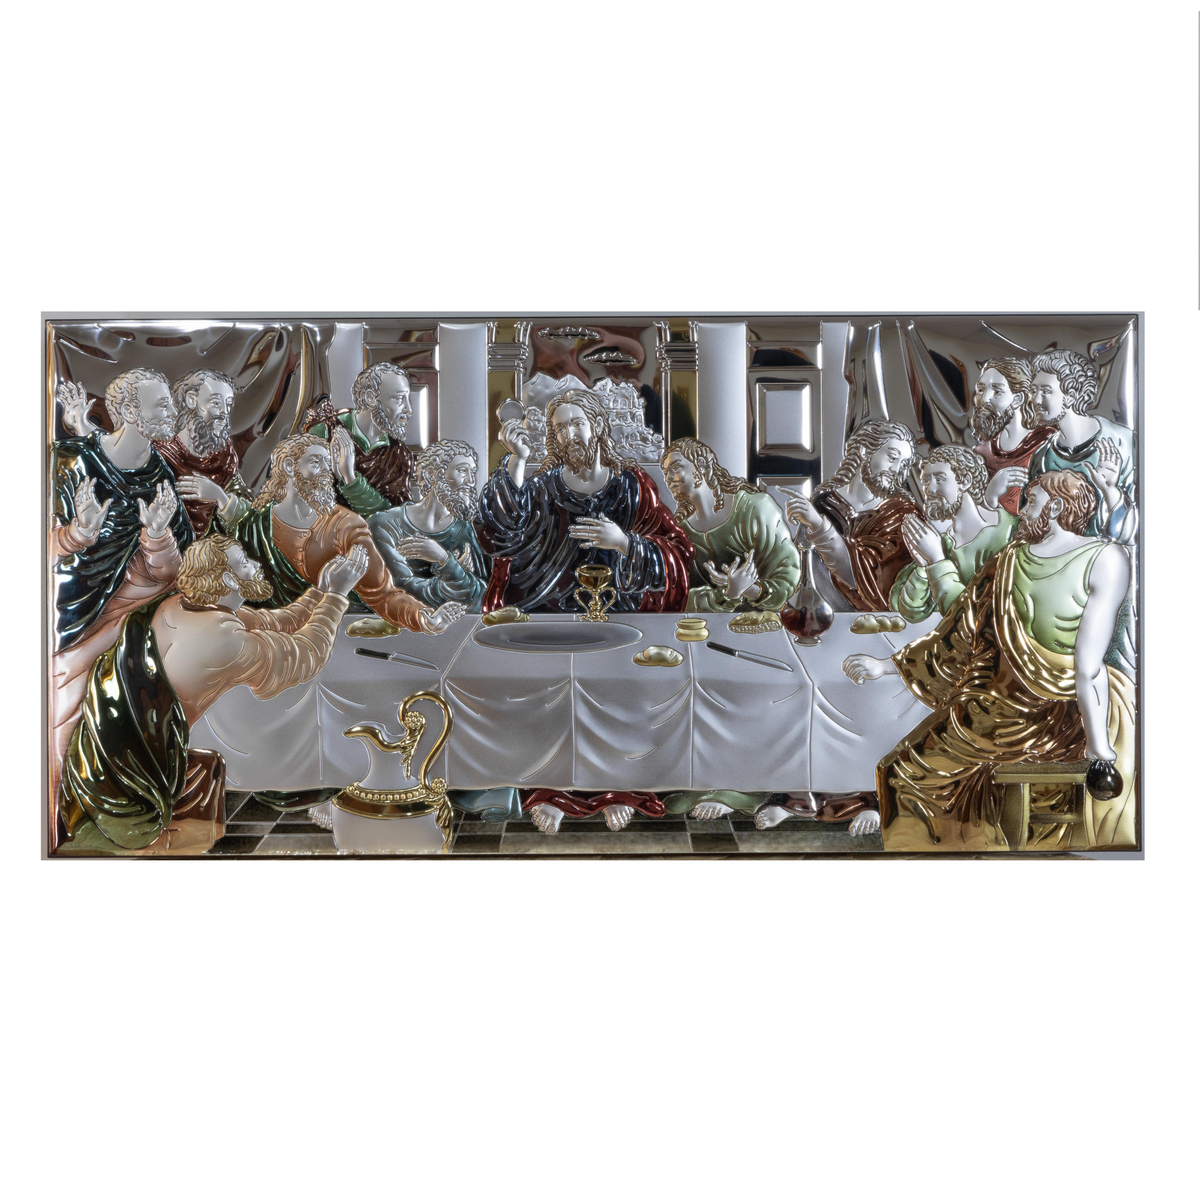 Icon of the Last Supper, Silver plated, Colored, Size: 25.5" x 12.5"